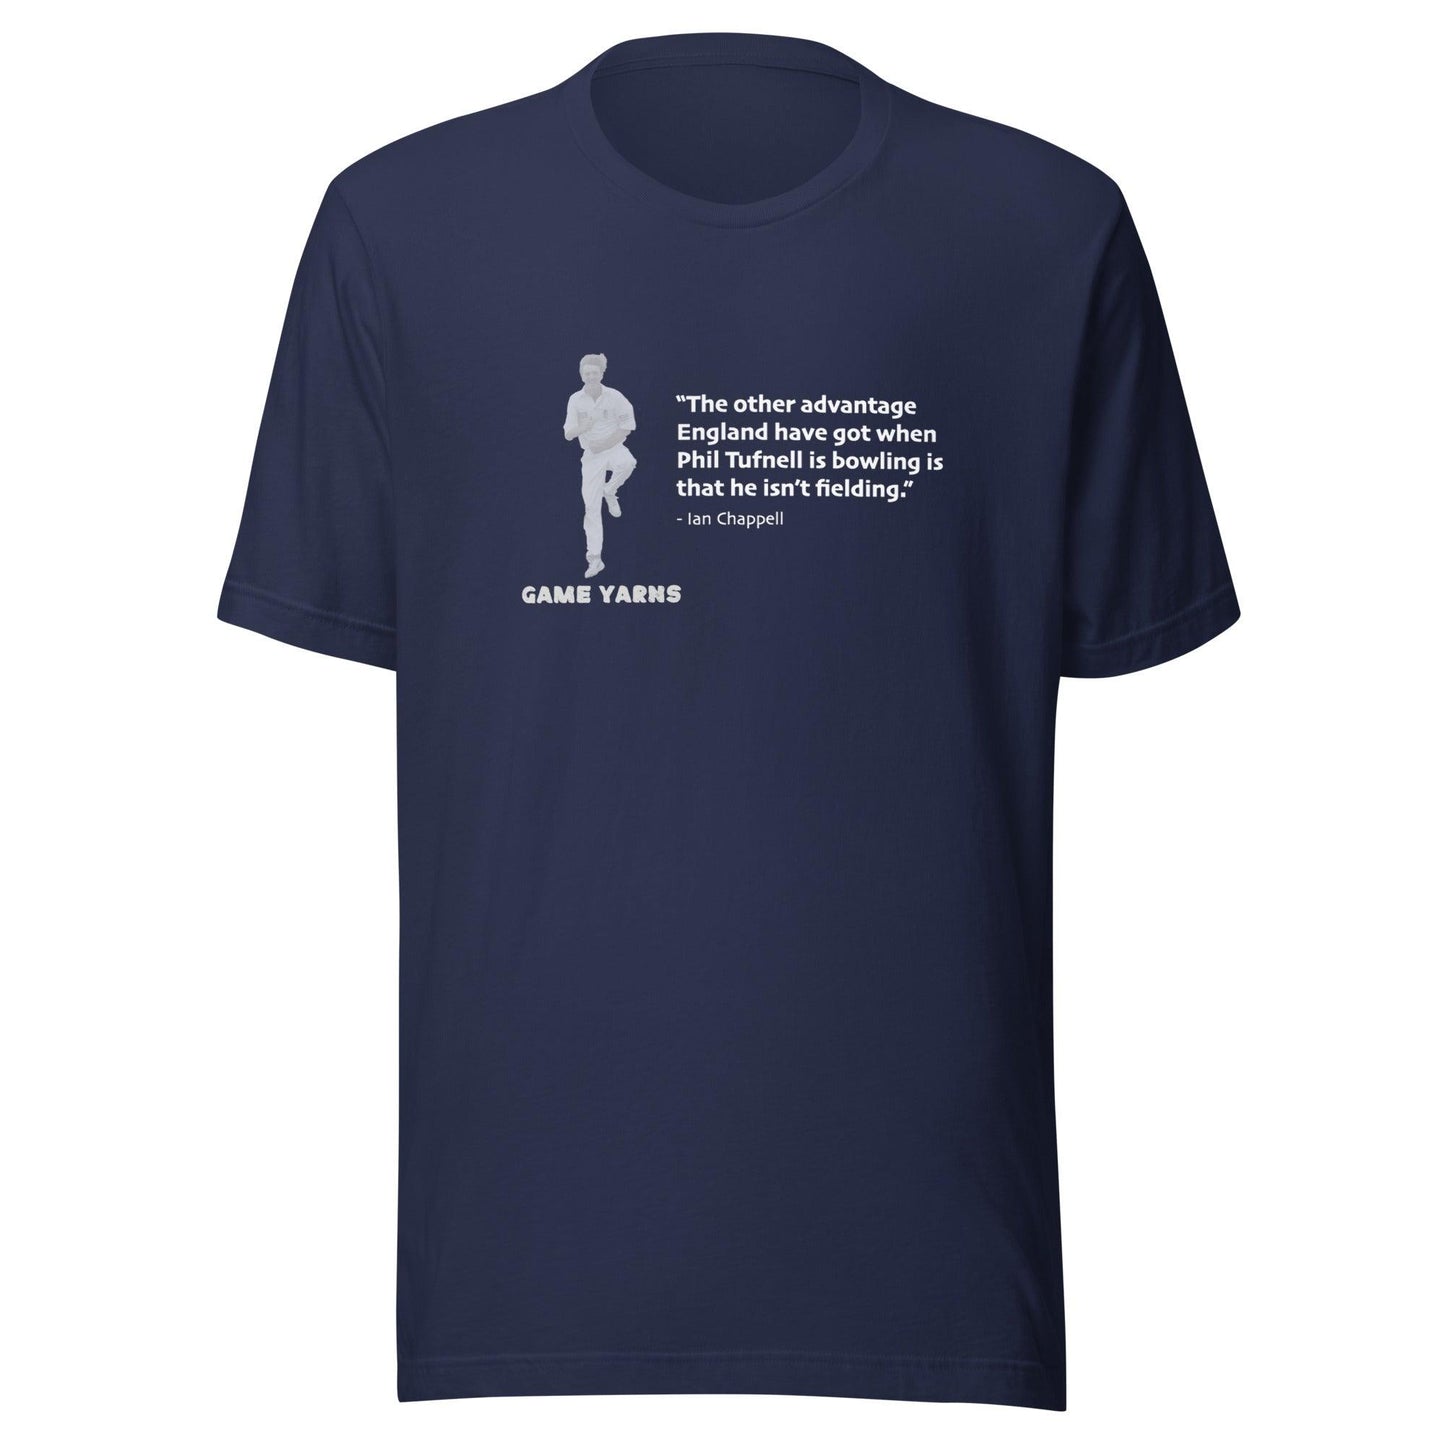 Ian Chappell on Phil Tufnell. Cricket T-shirt by Game Yarns